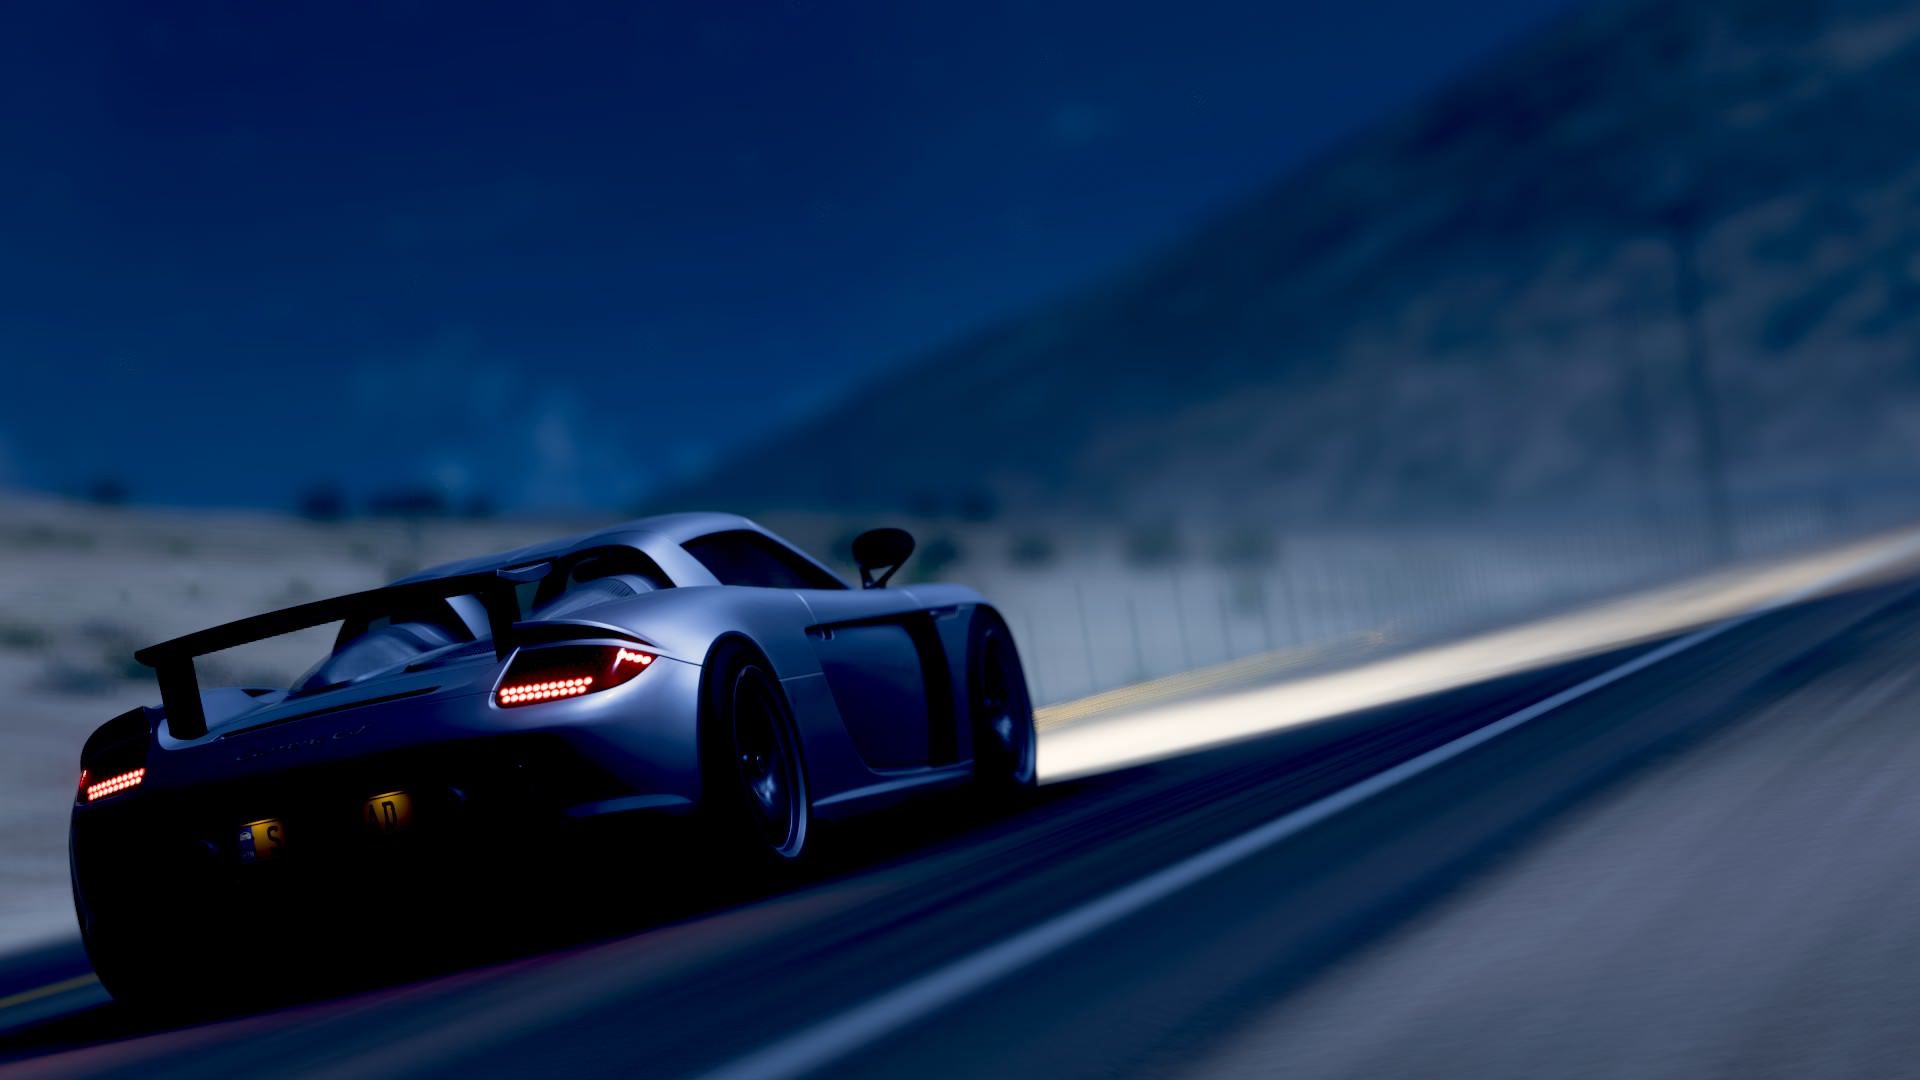 It's been almost 10 days, and I haven't uploaded a picture of the Carrera GT